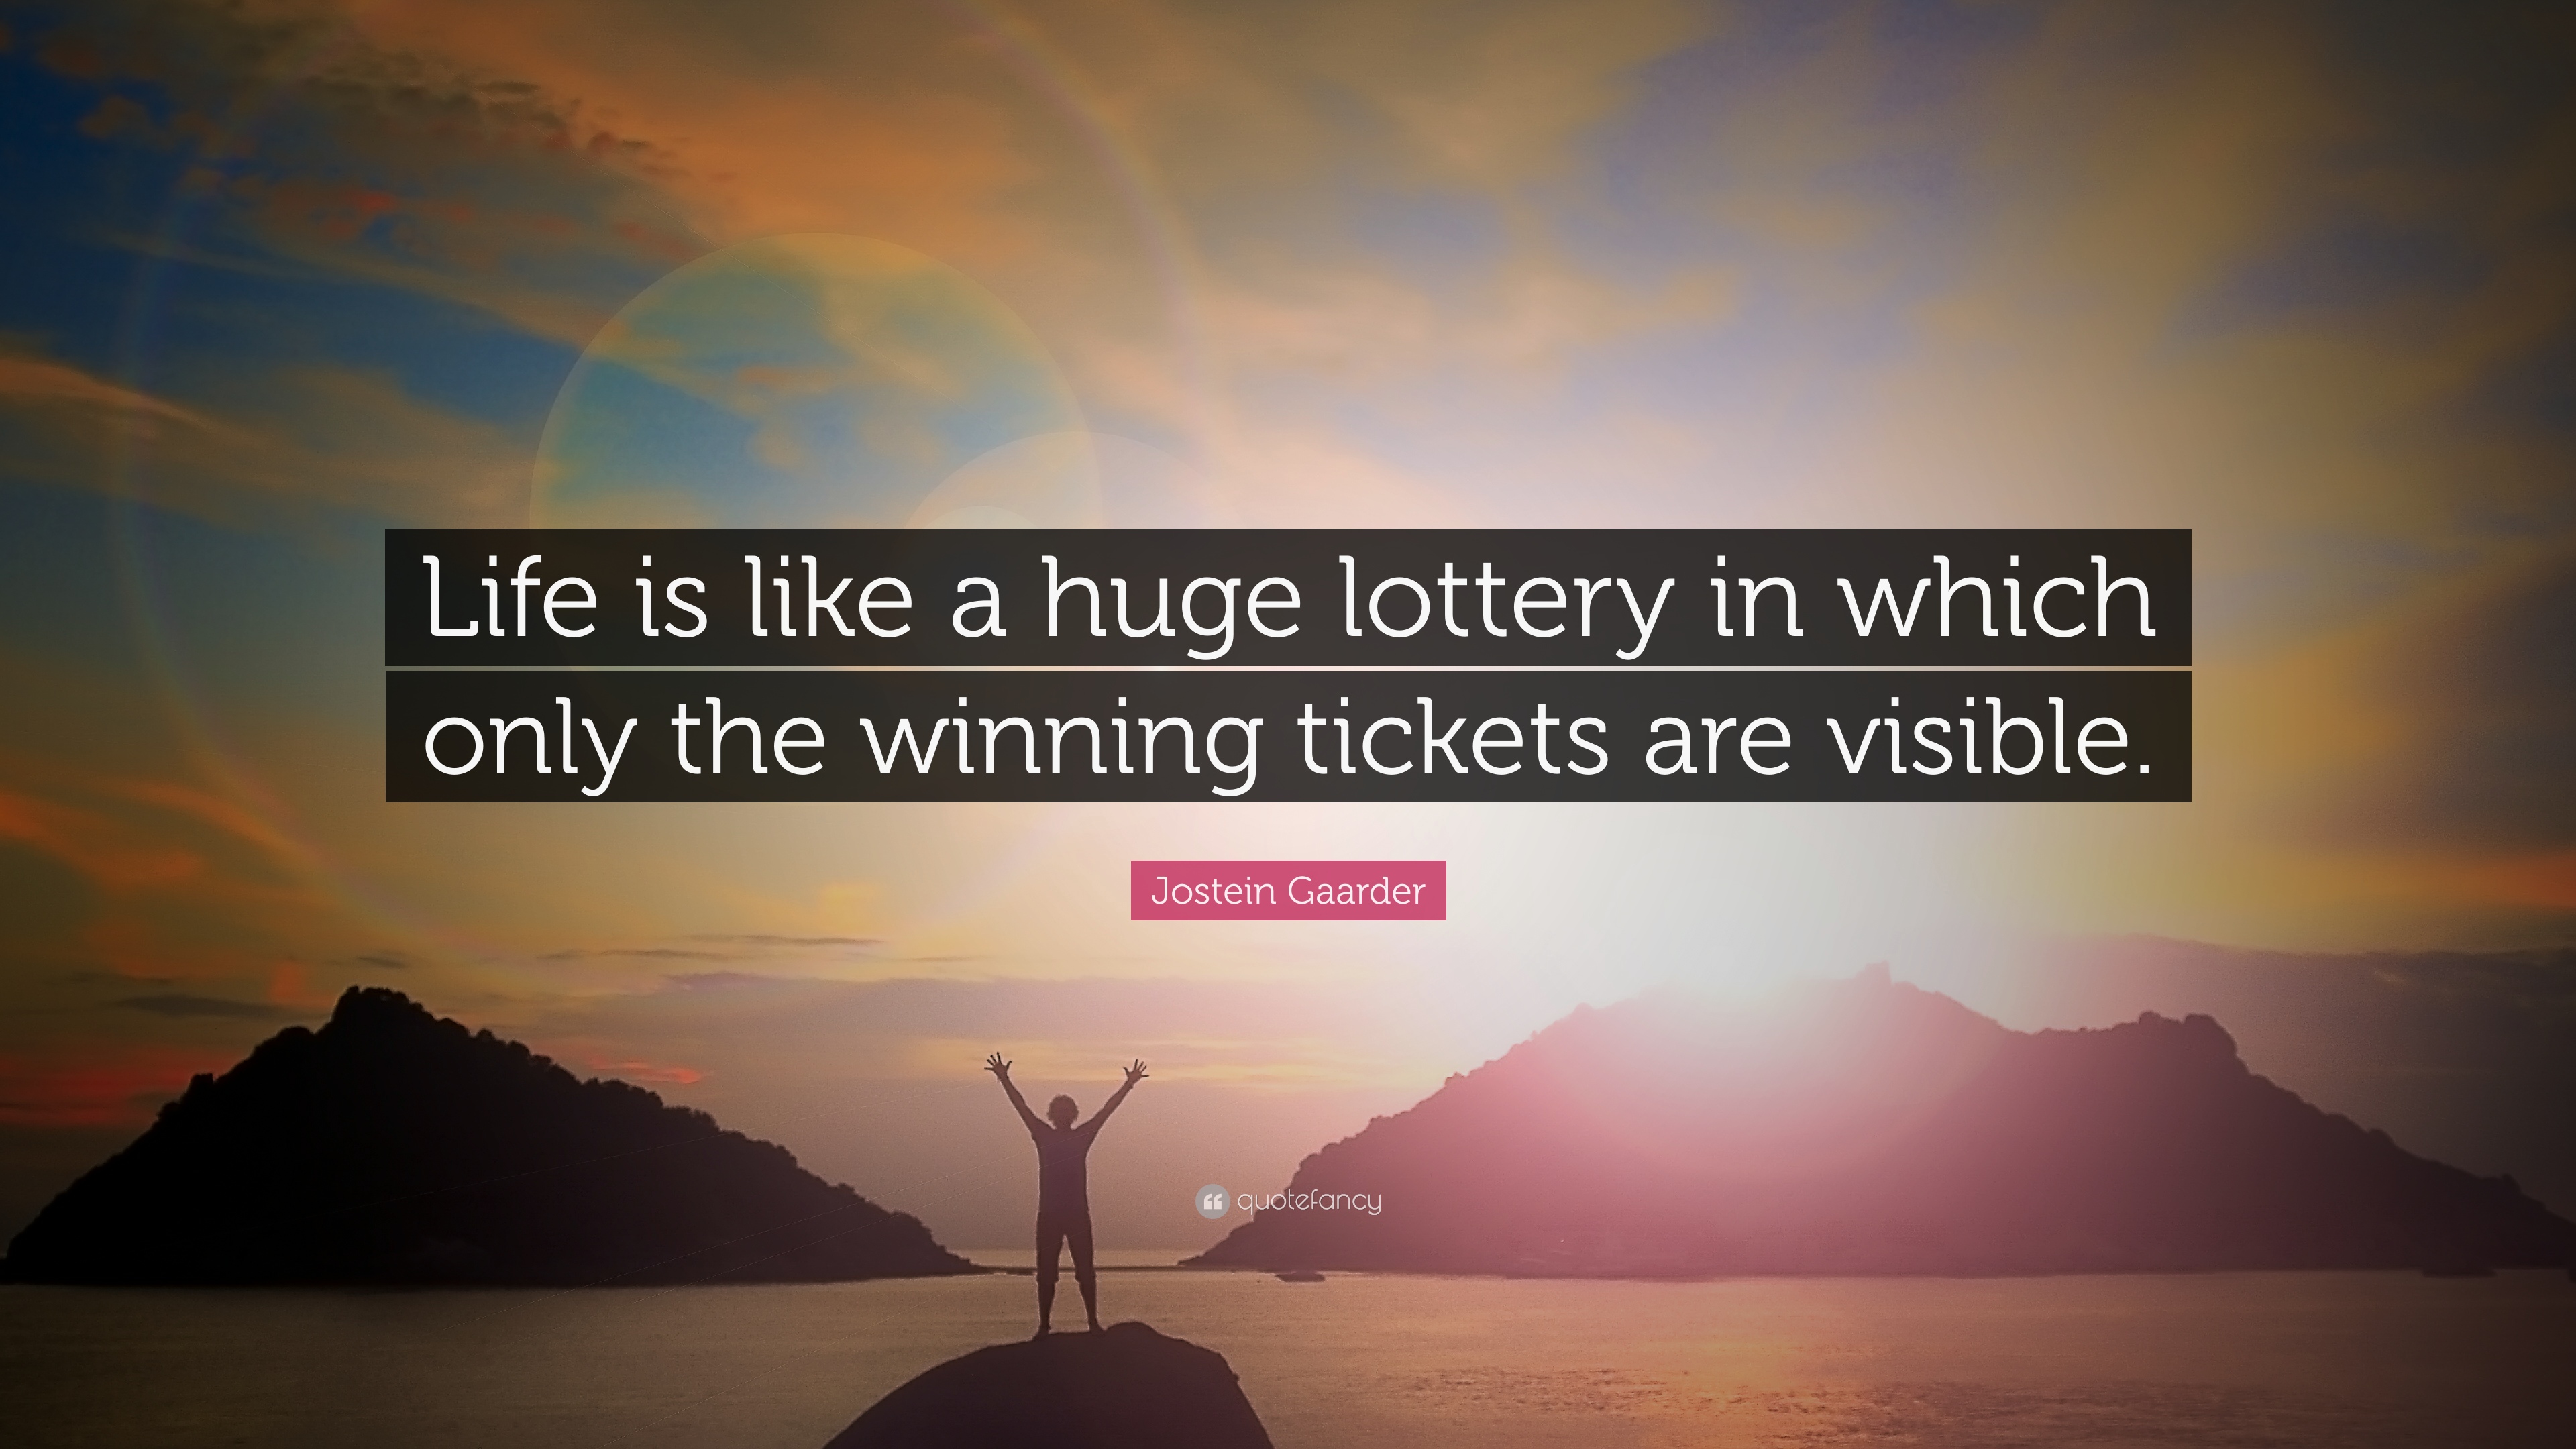 Jostein Gaarder Quote: “Life is like a huge lottery in which